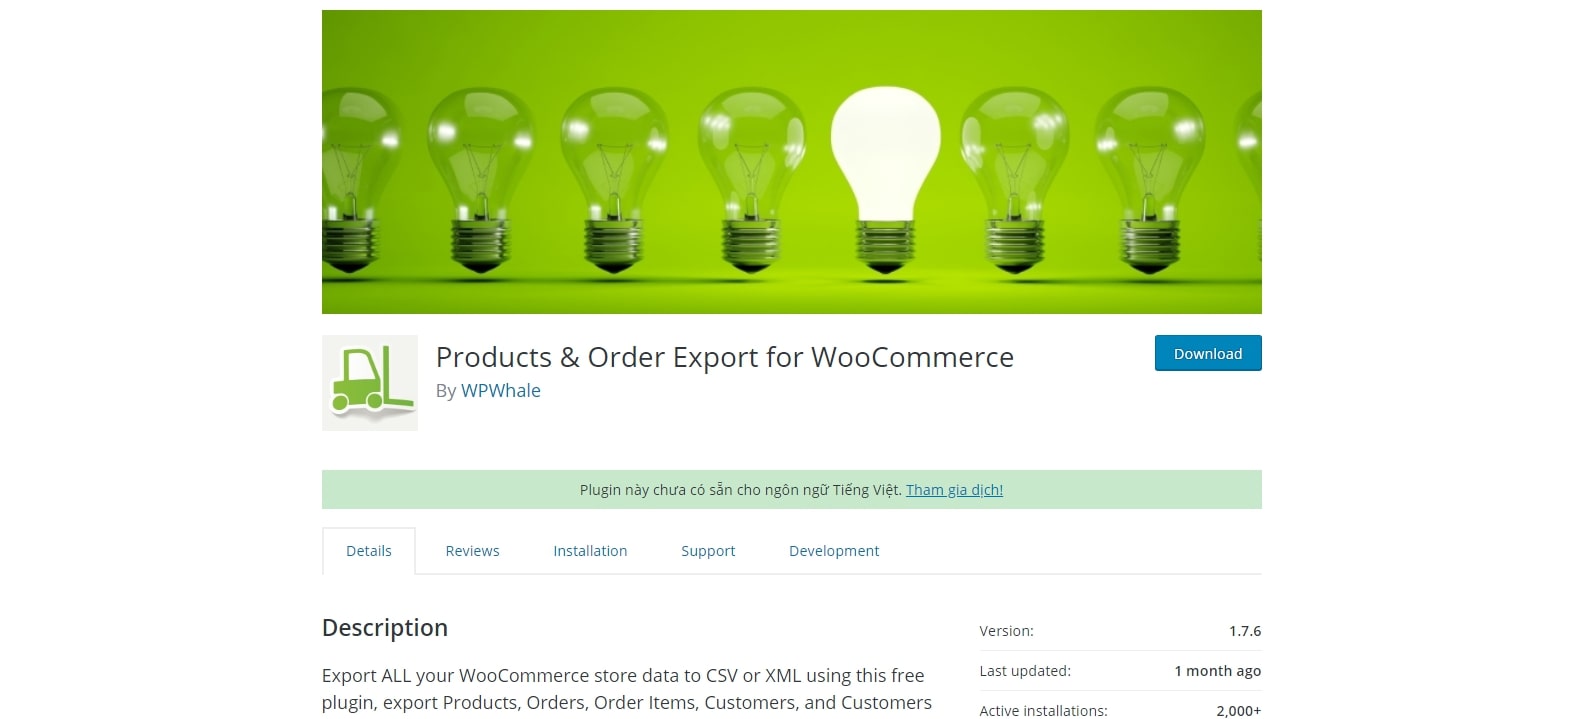 Products & Order export for WooCommerce